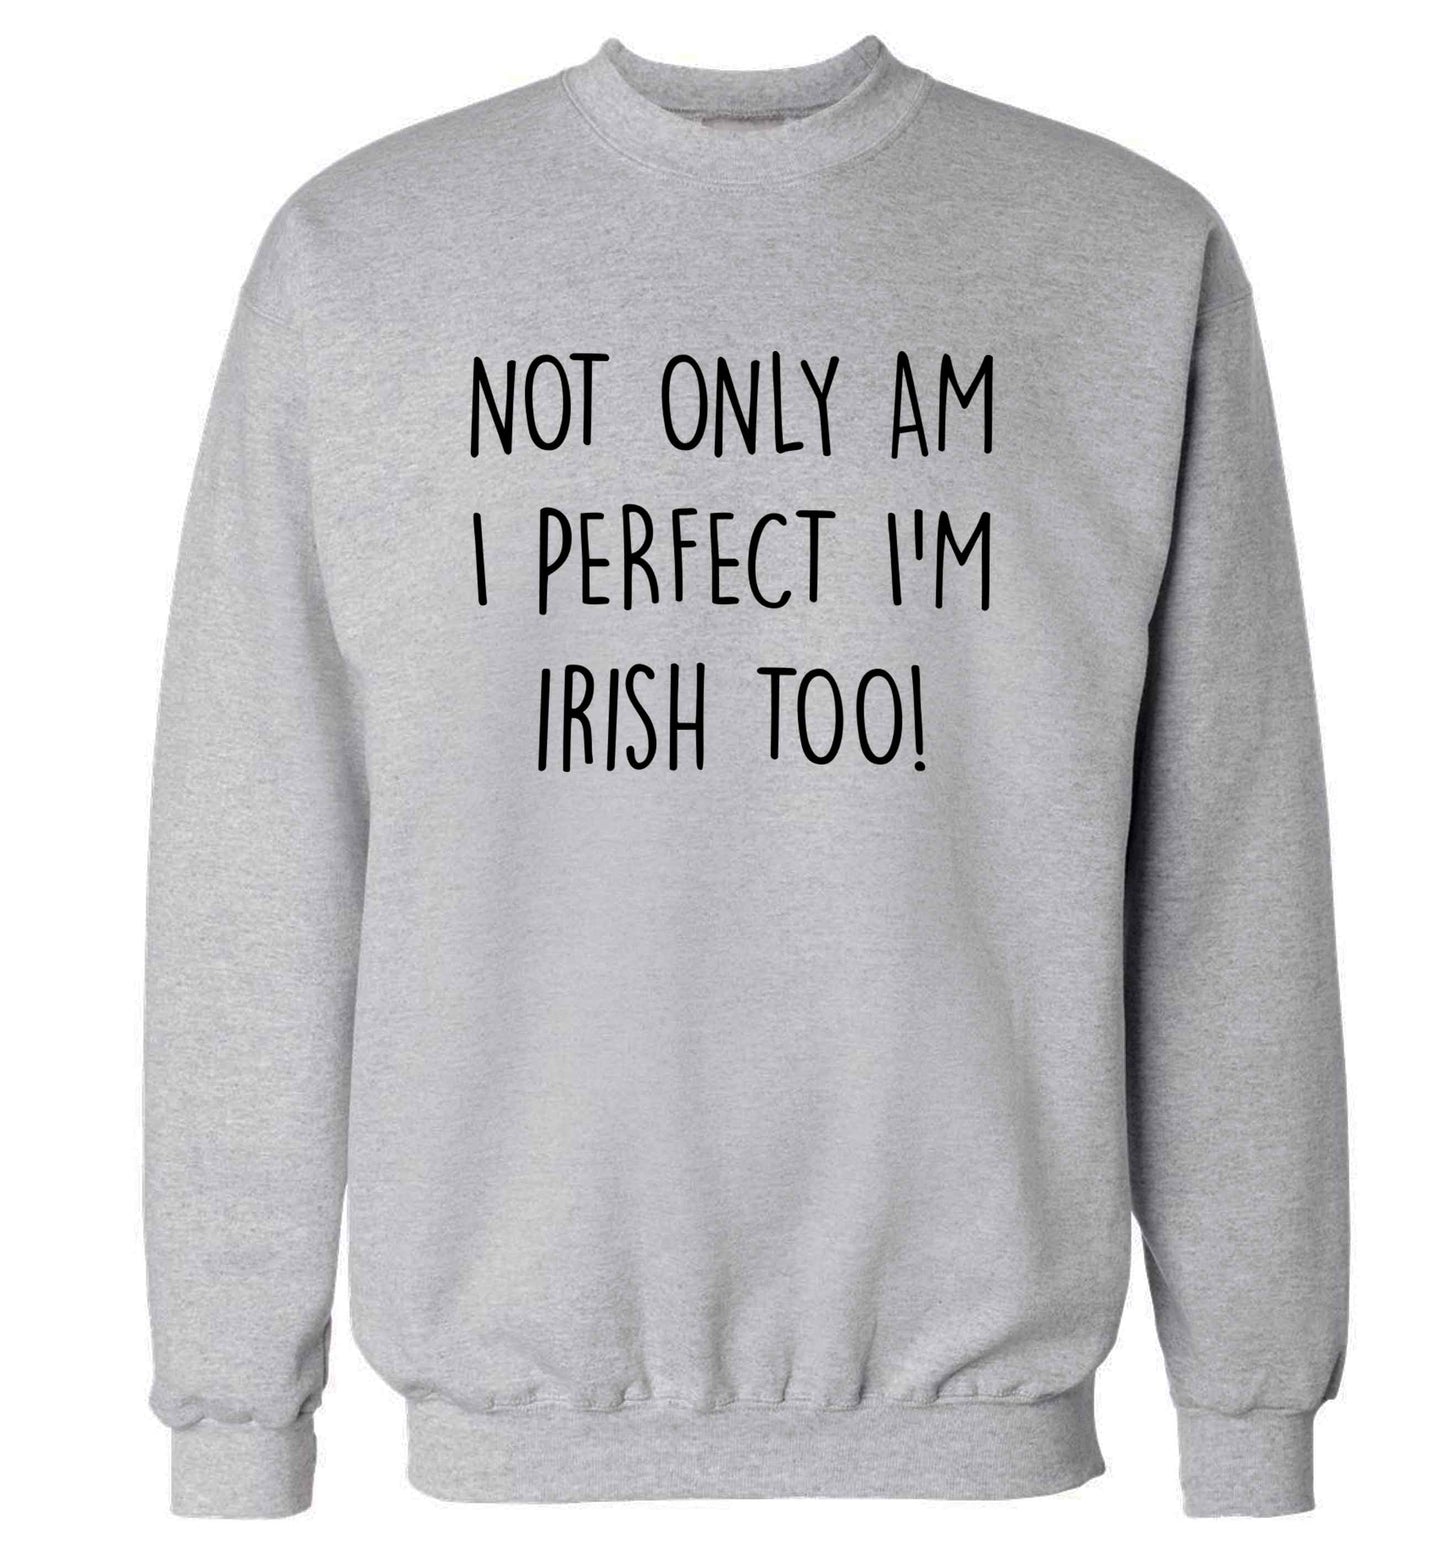 Not only am I perfect I'm Irish too! adult's unisex grey sweater 2XL